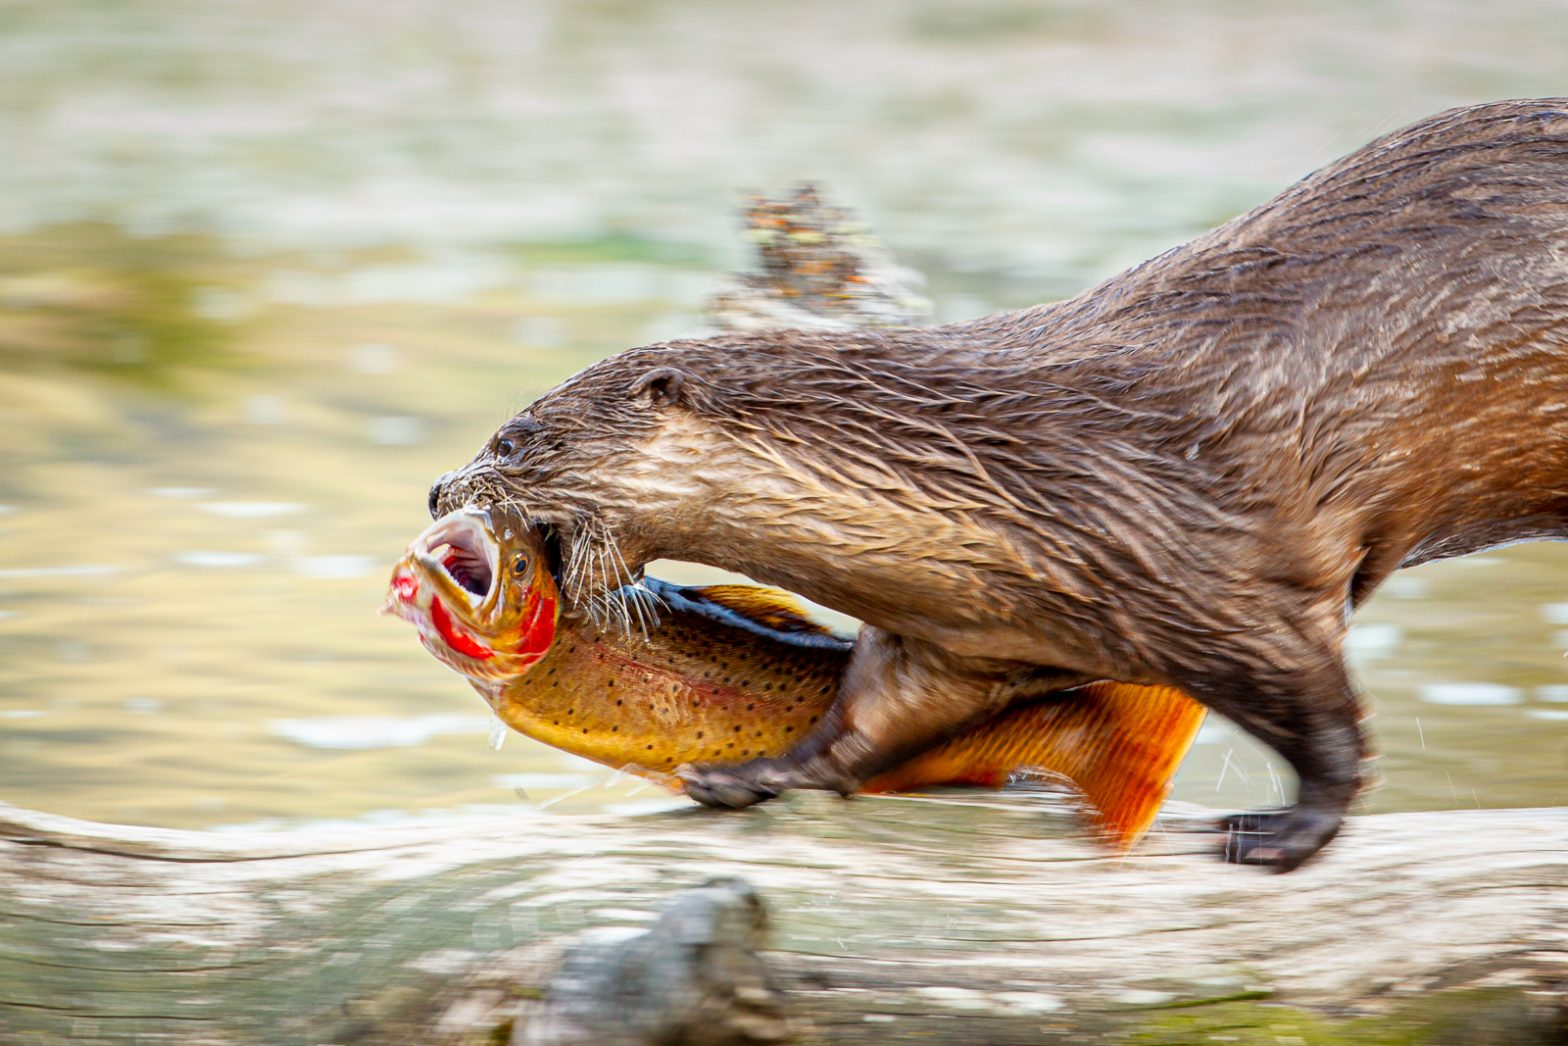 Wildlife photography of a North American River Otter running across a log carrying a Cutthroat Trout in Yellowstone National Park